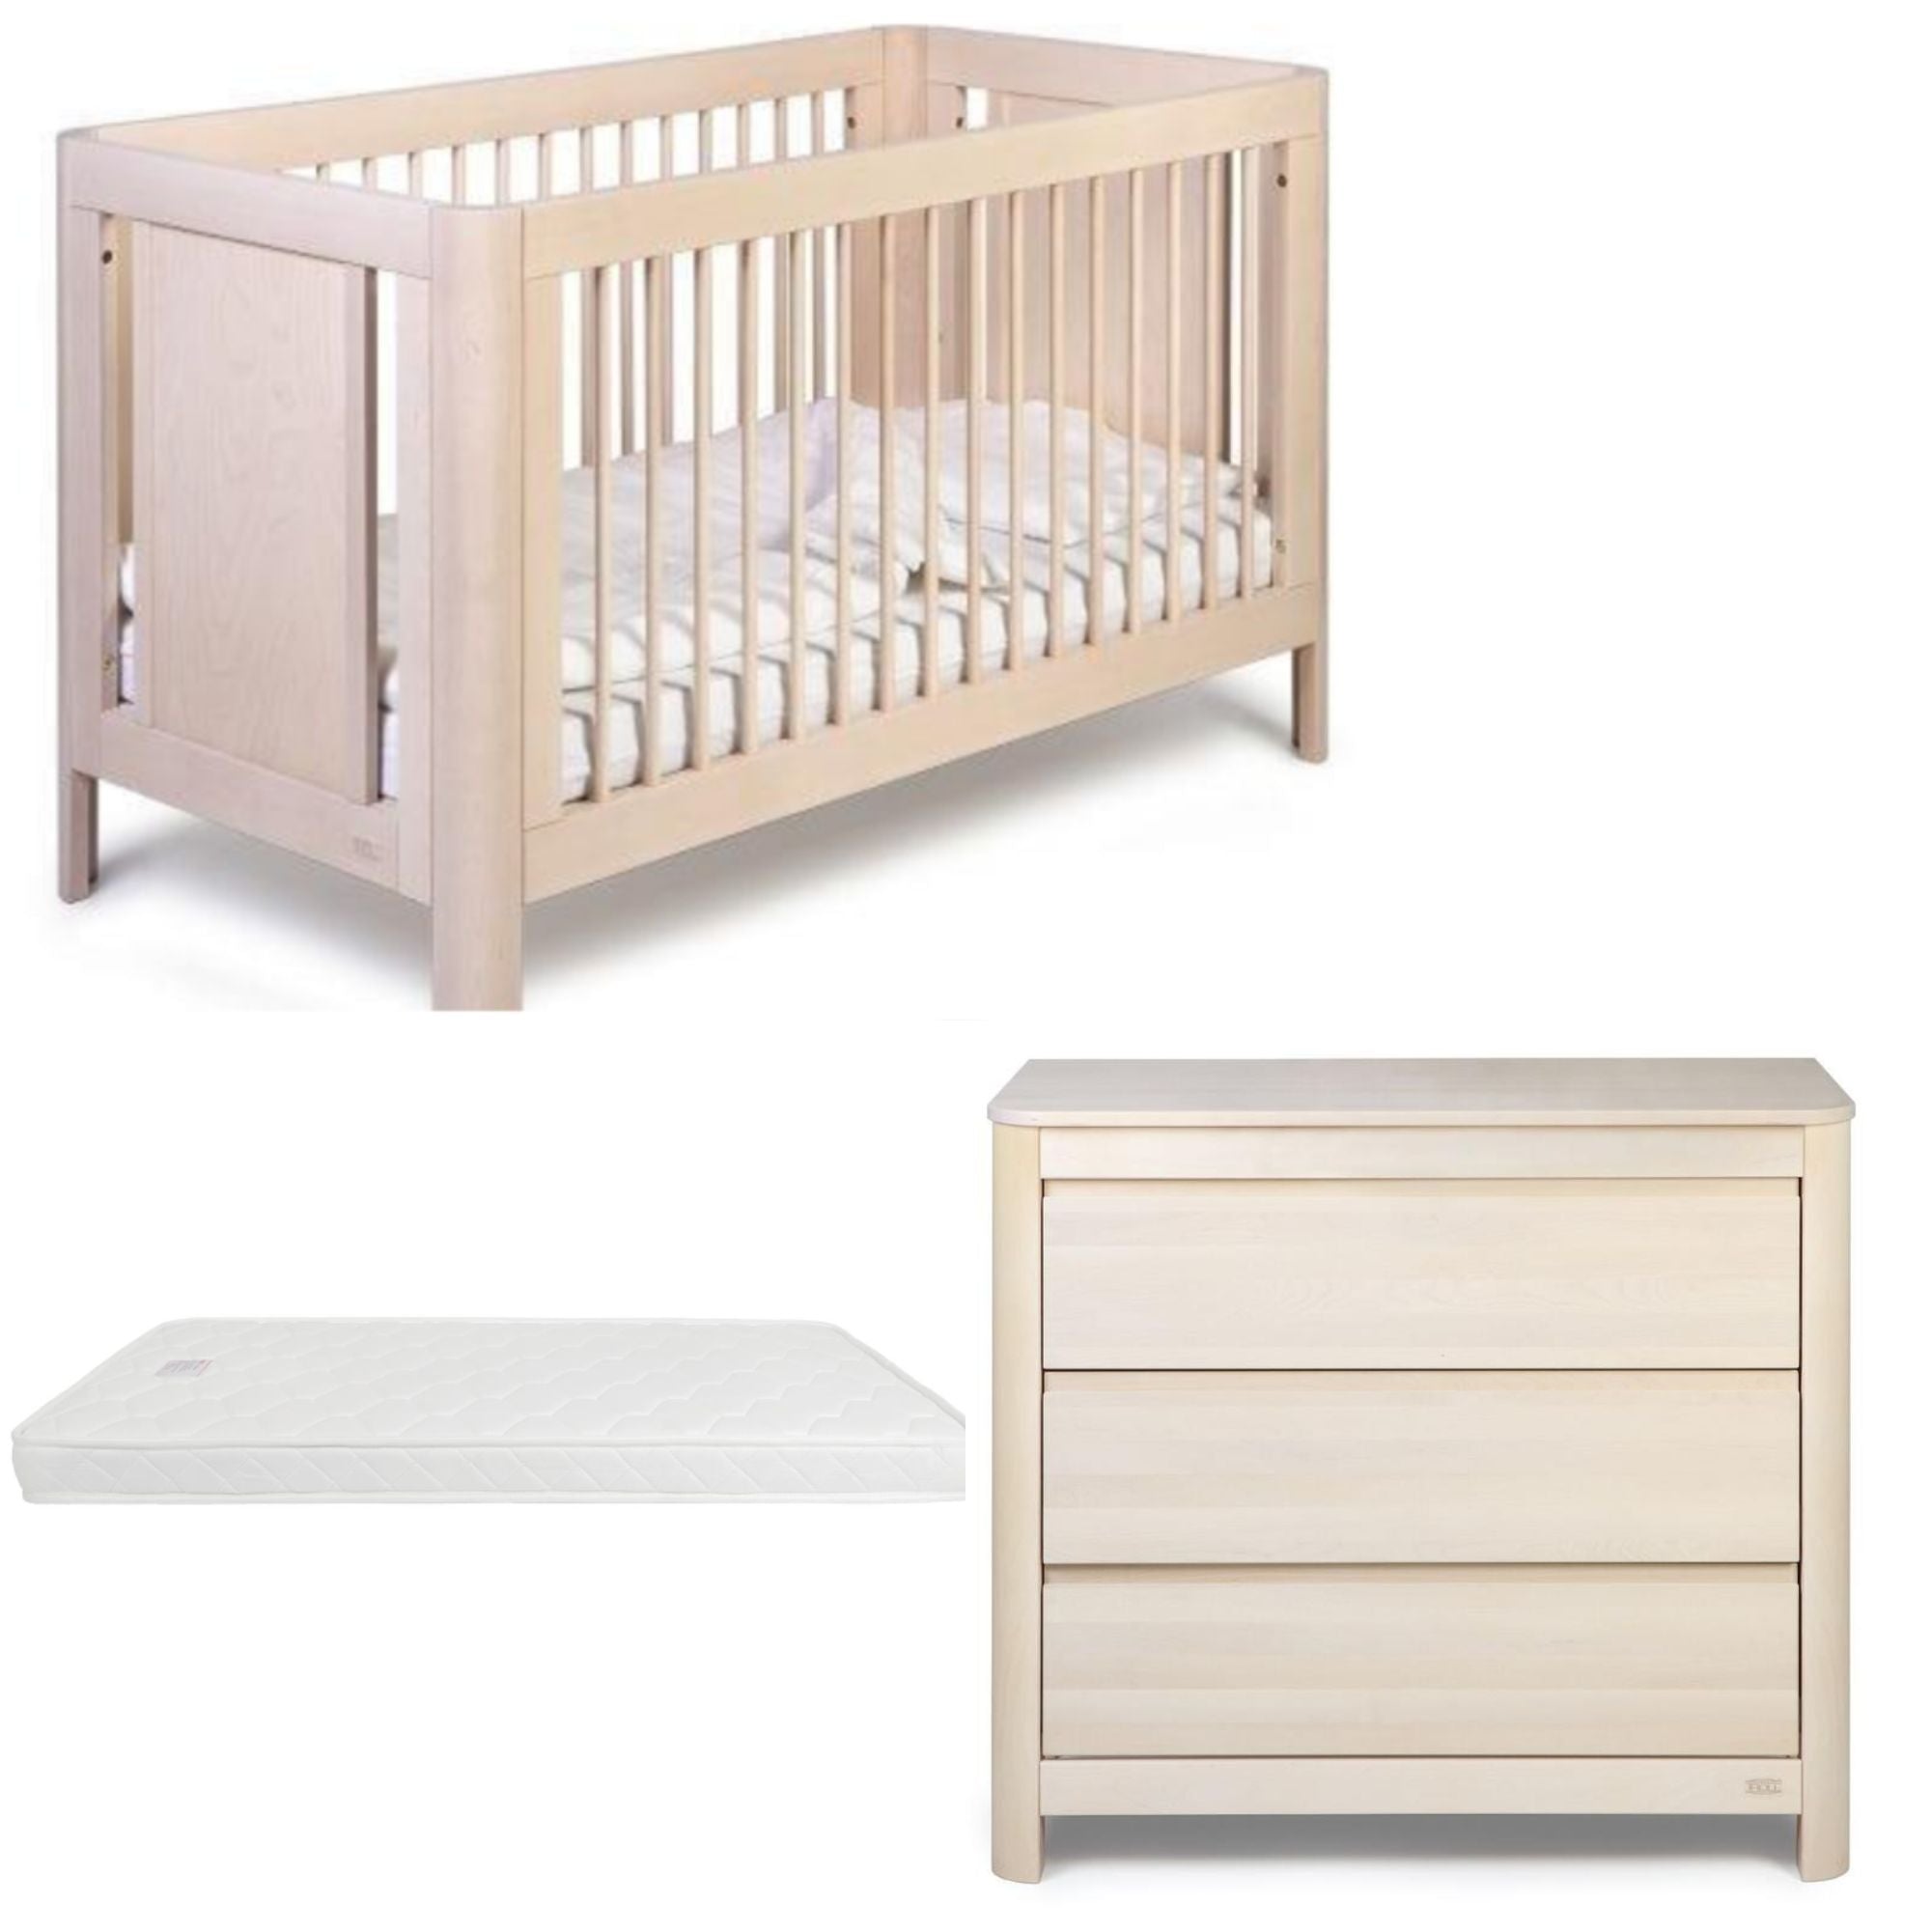 Troll Sun Cot 5 PC Package White Wash ( Nov Promotion FREE Mattress & Manchester)